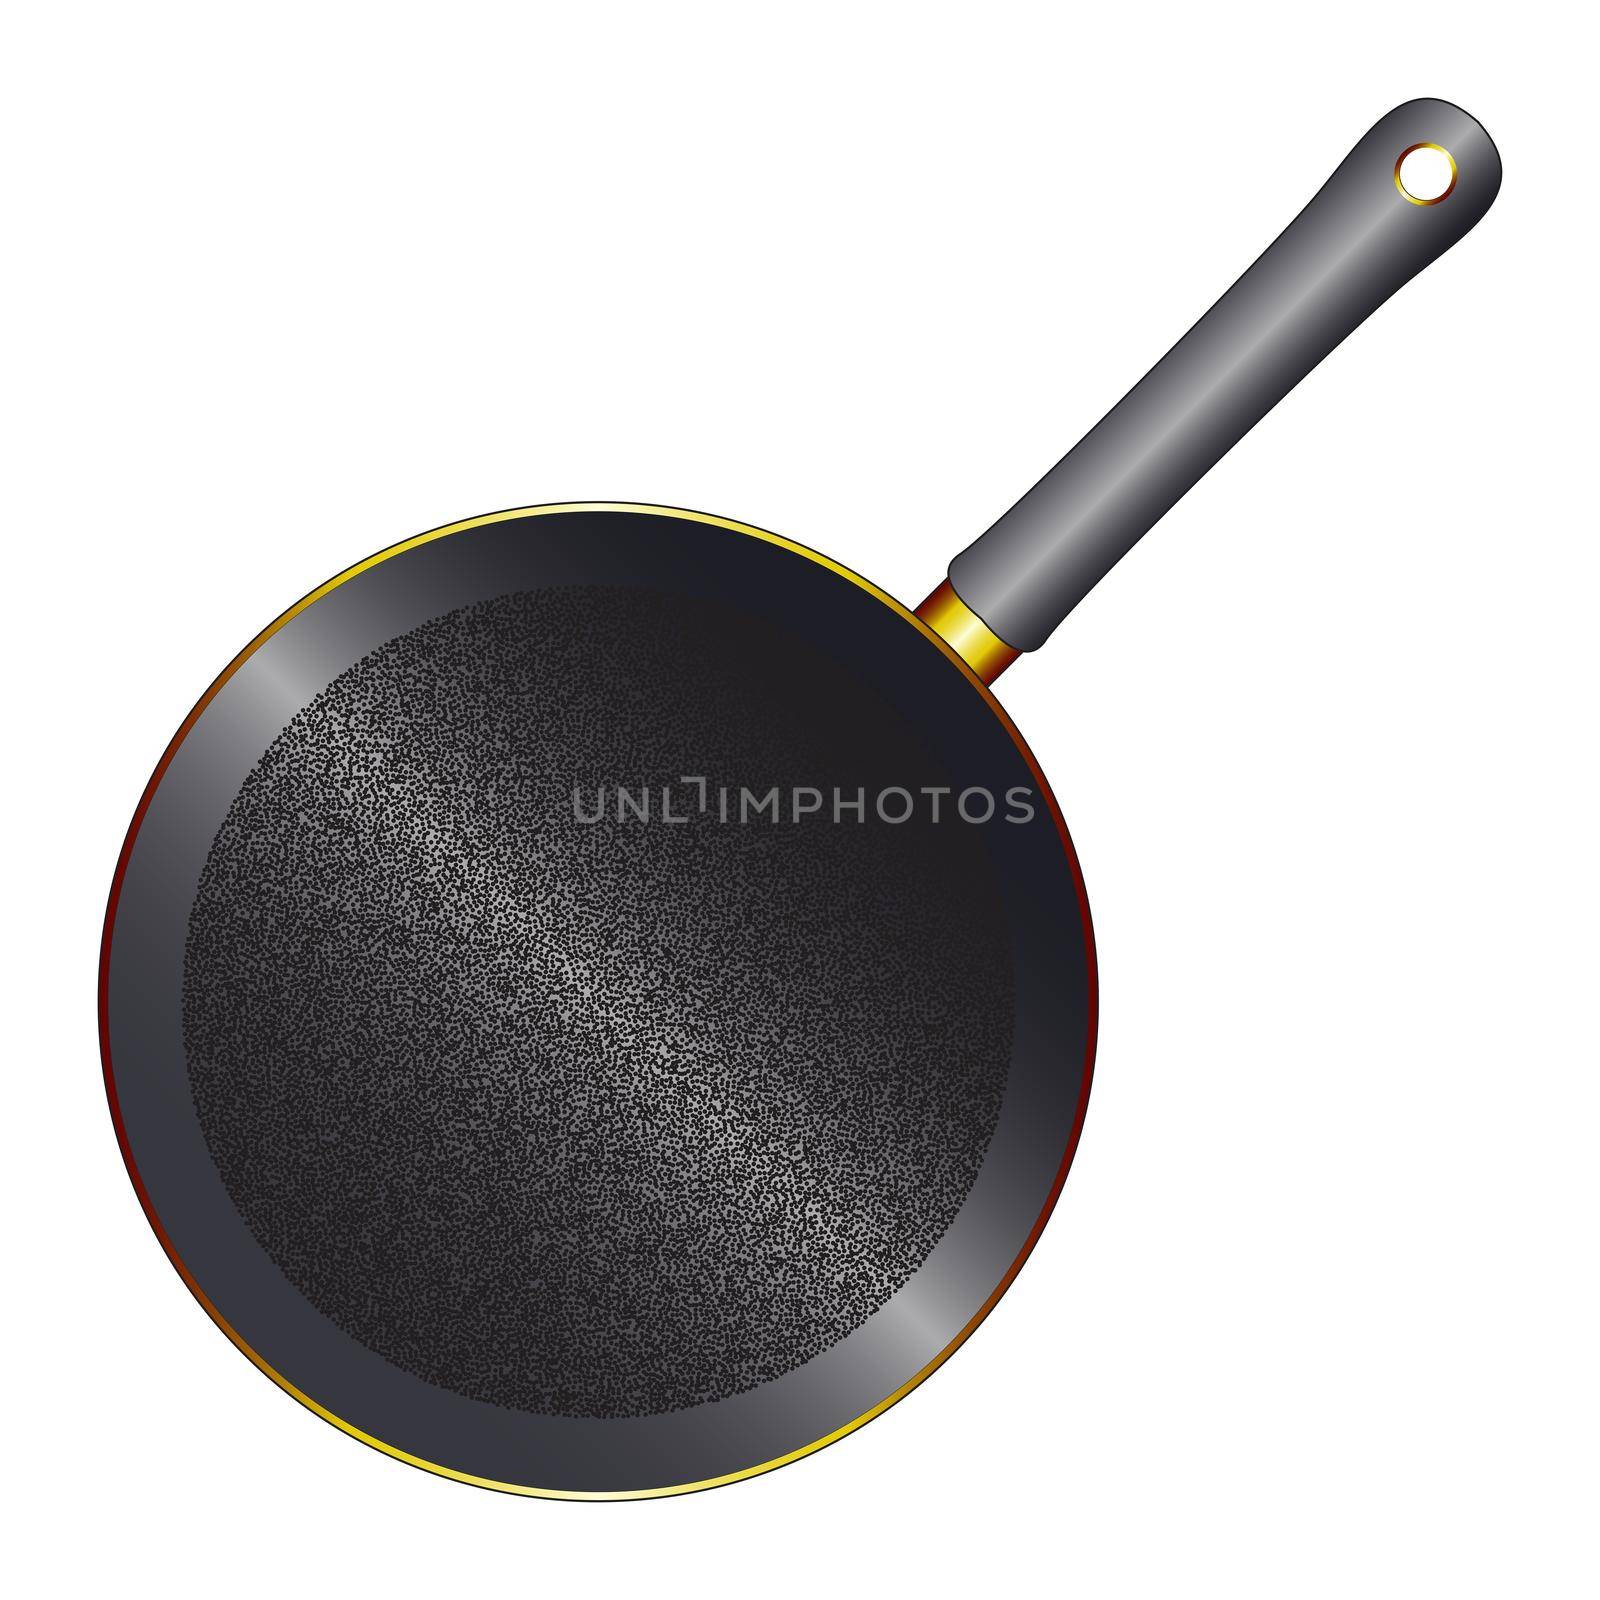 A black metal frying pan with wooden handle and stipple base on a white background